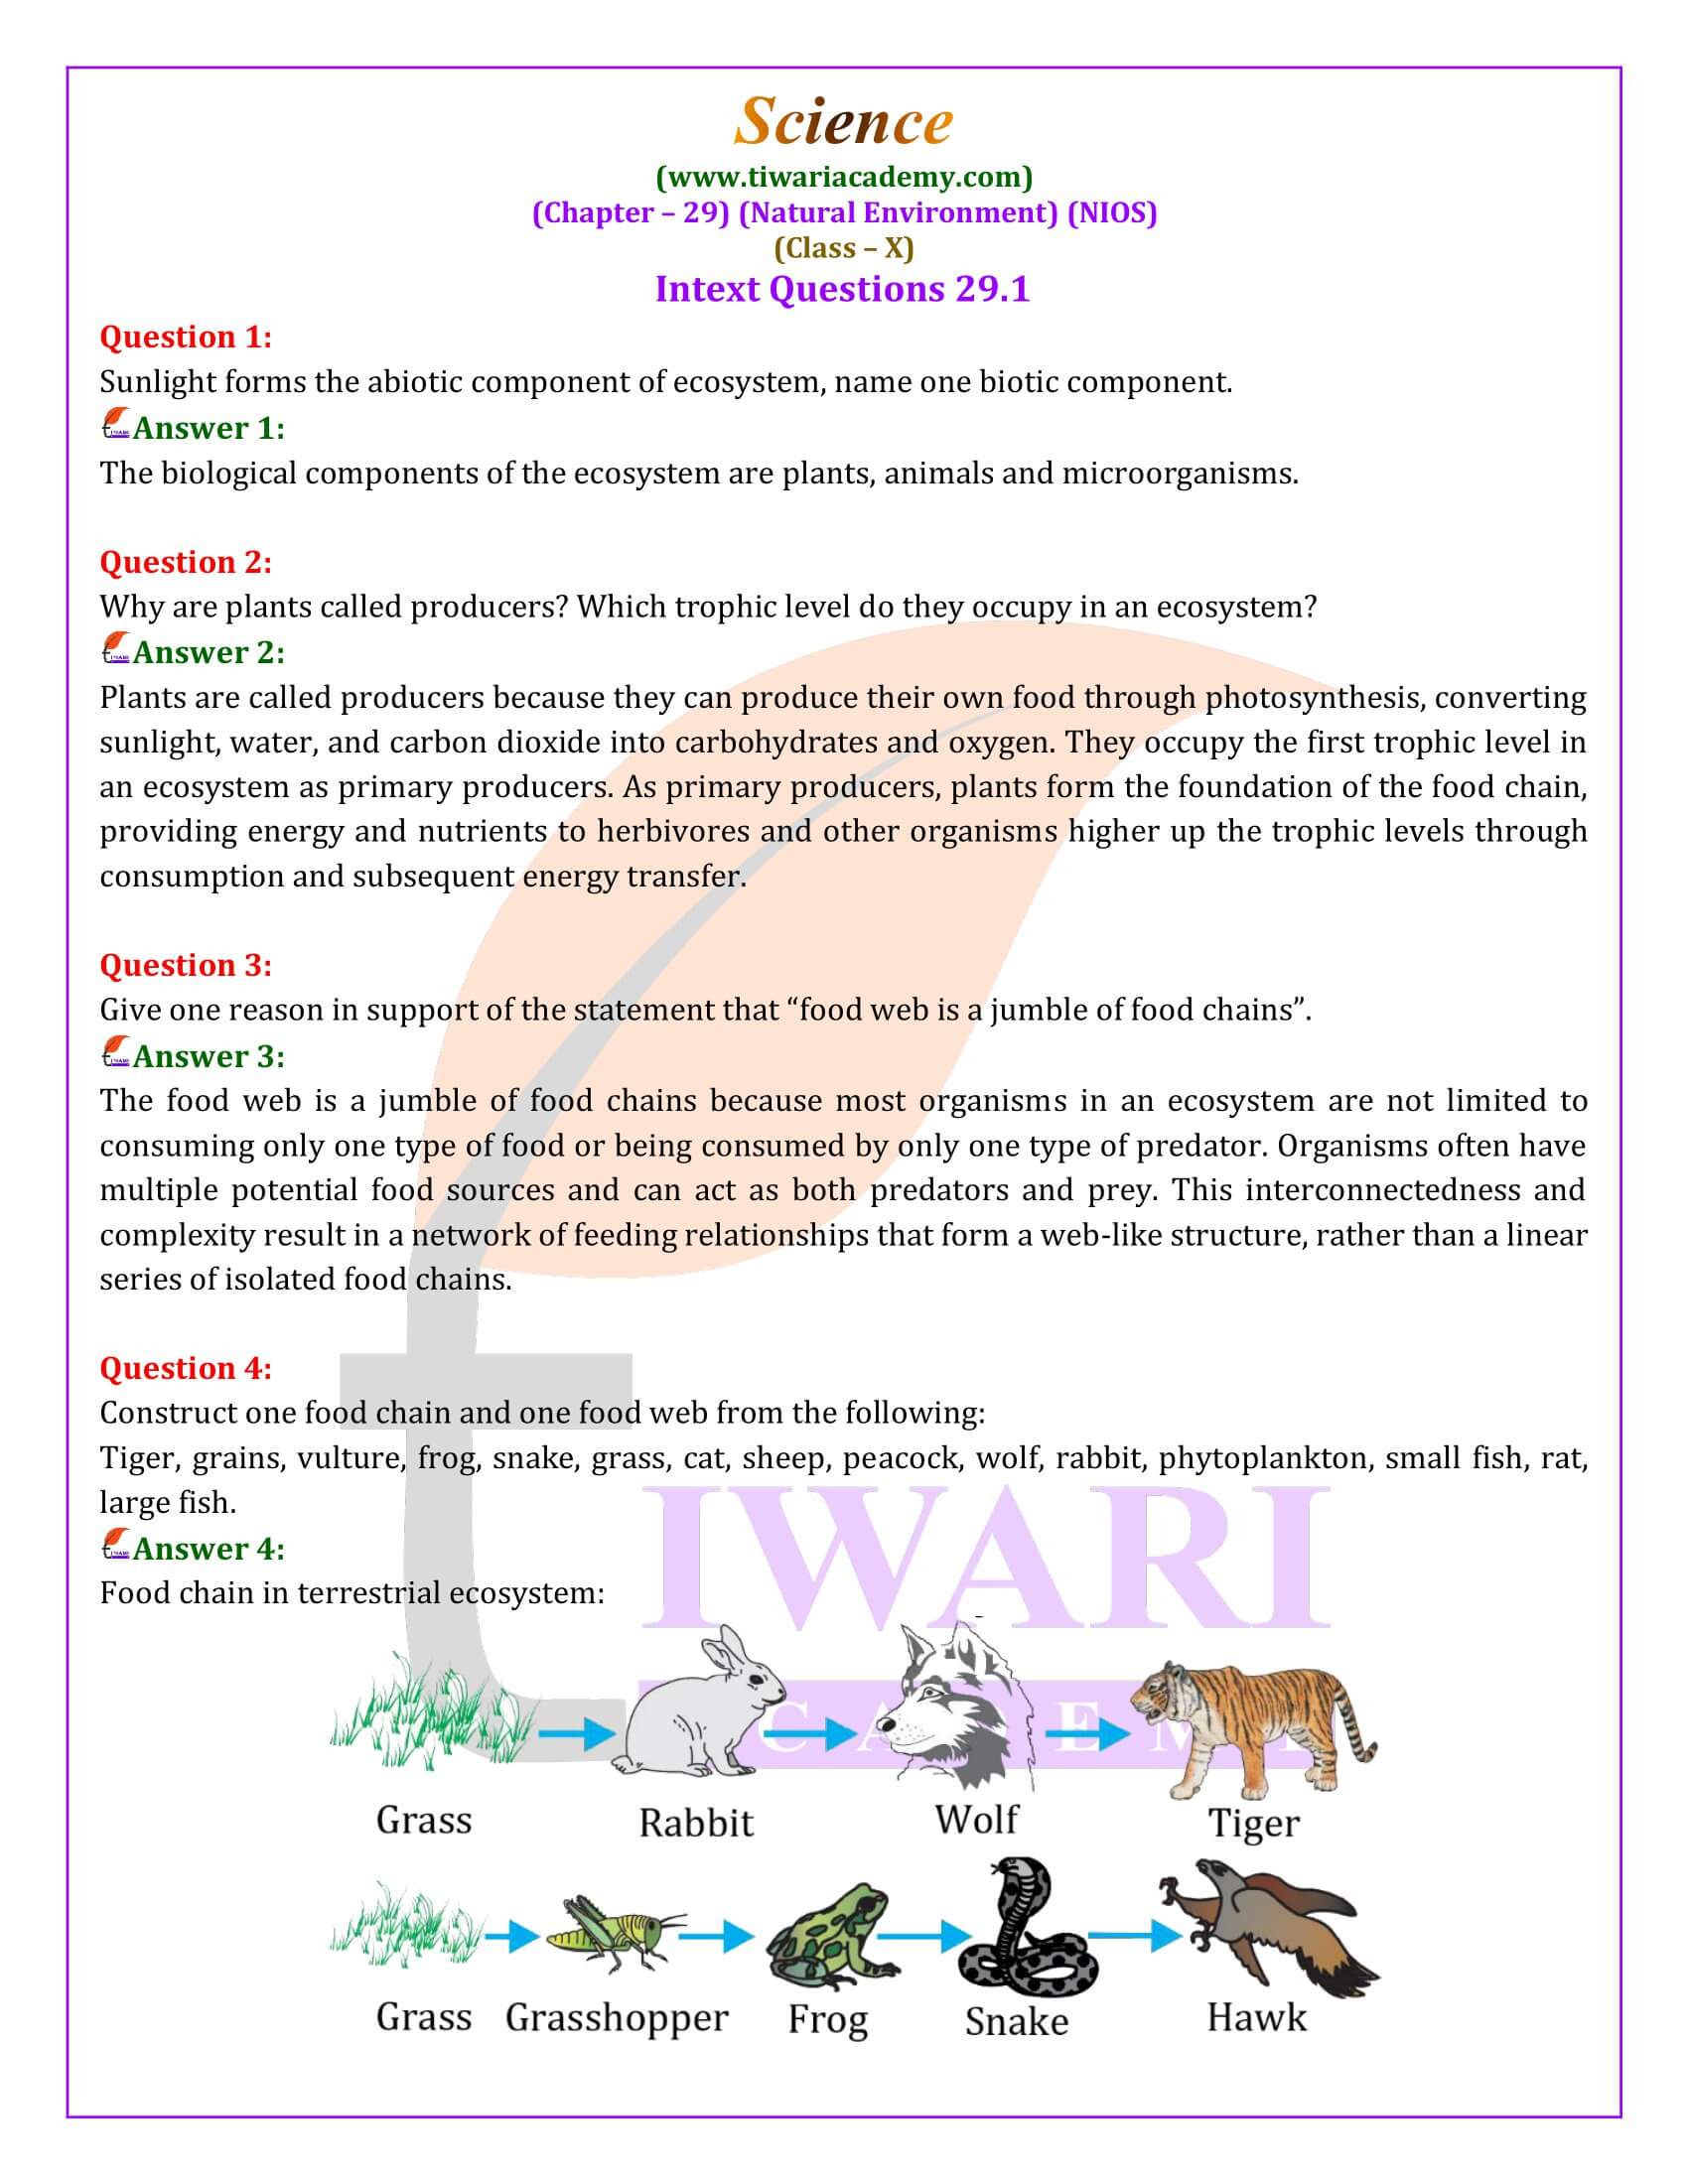 NIOS Class 10 Science Chapter 29 Natural Environment Question Answers